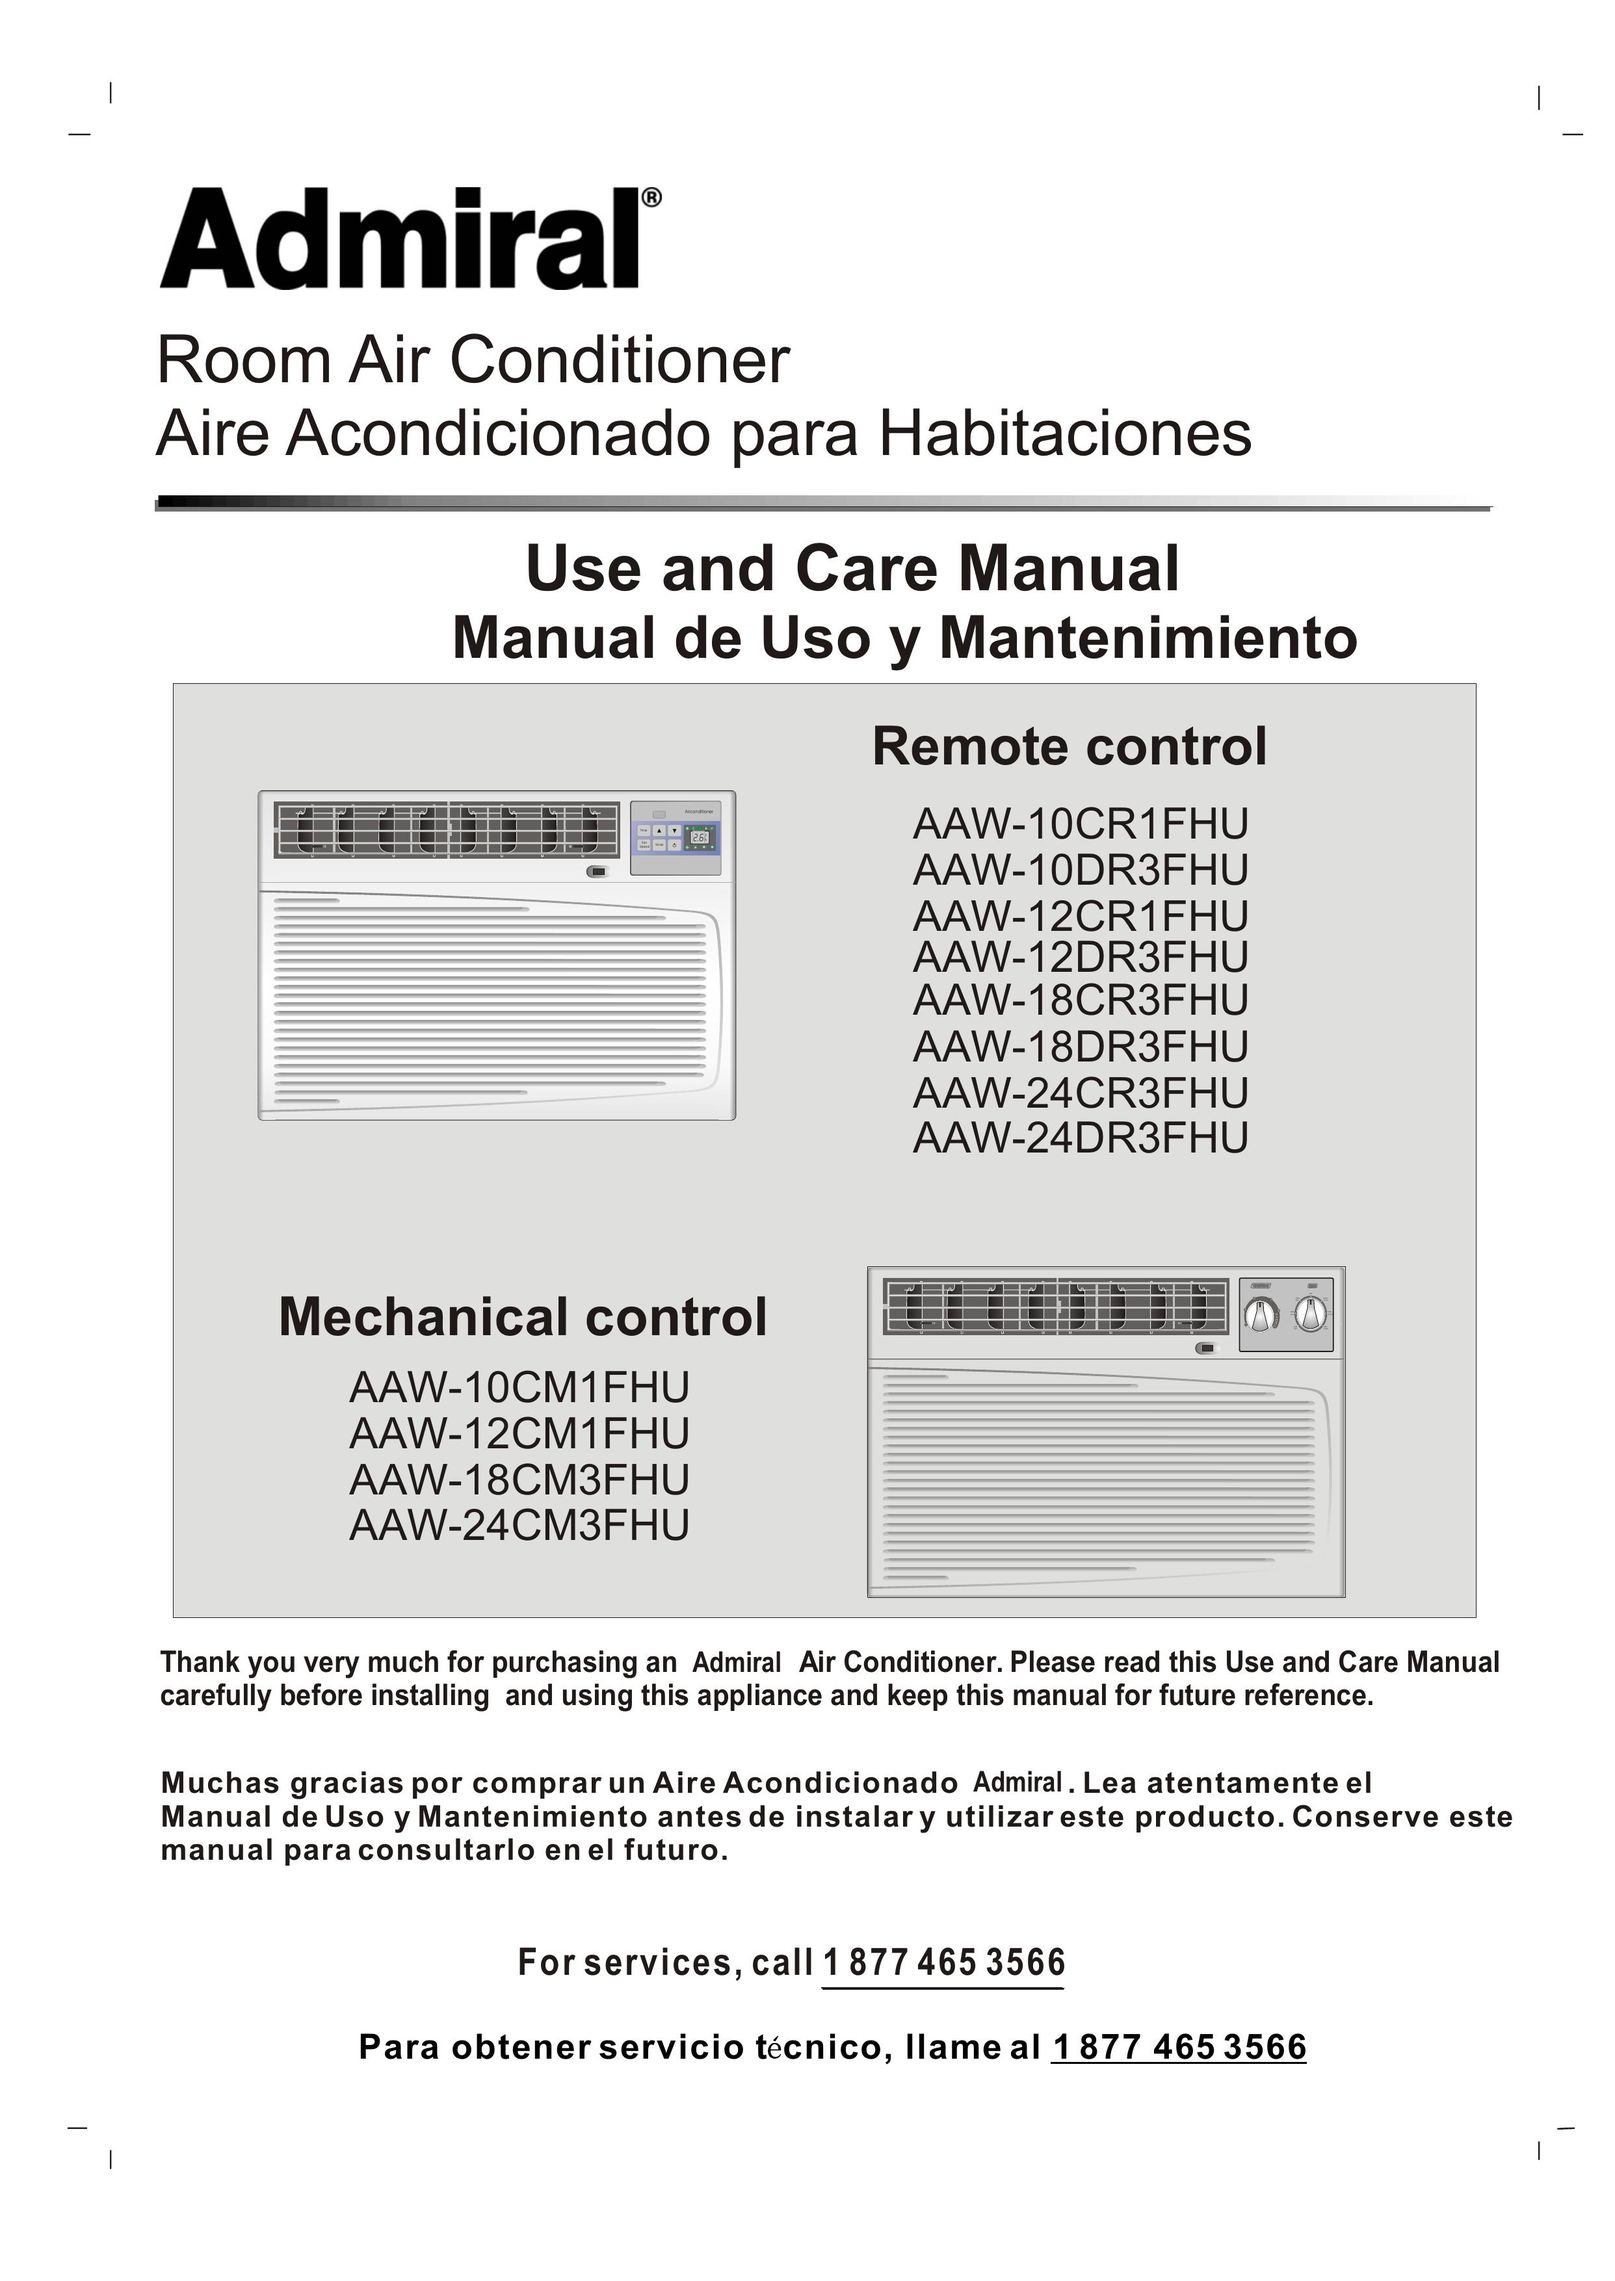 Admiral AAW-10DR3FHU Air Conditioner User Manual